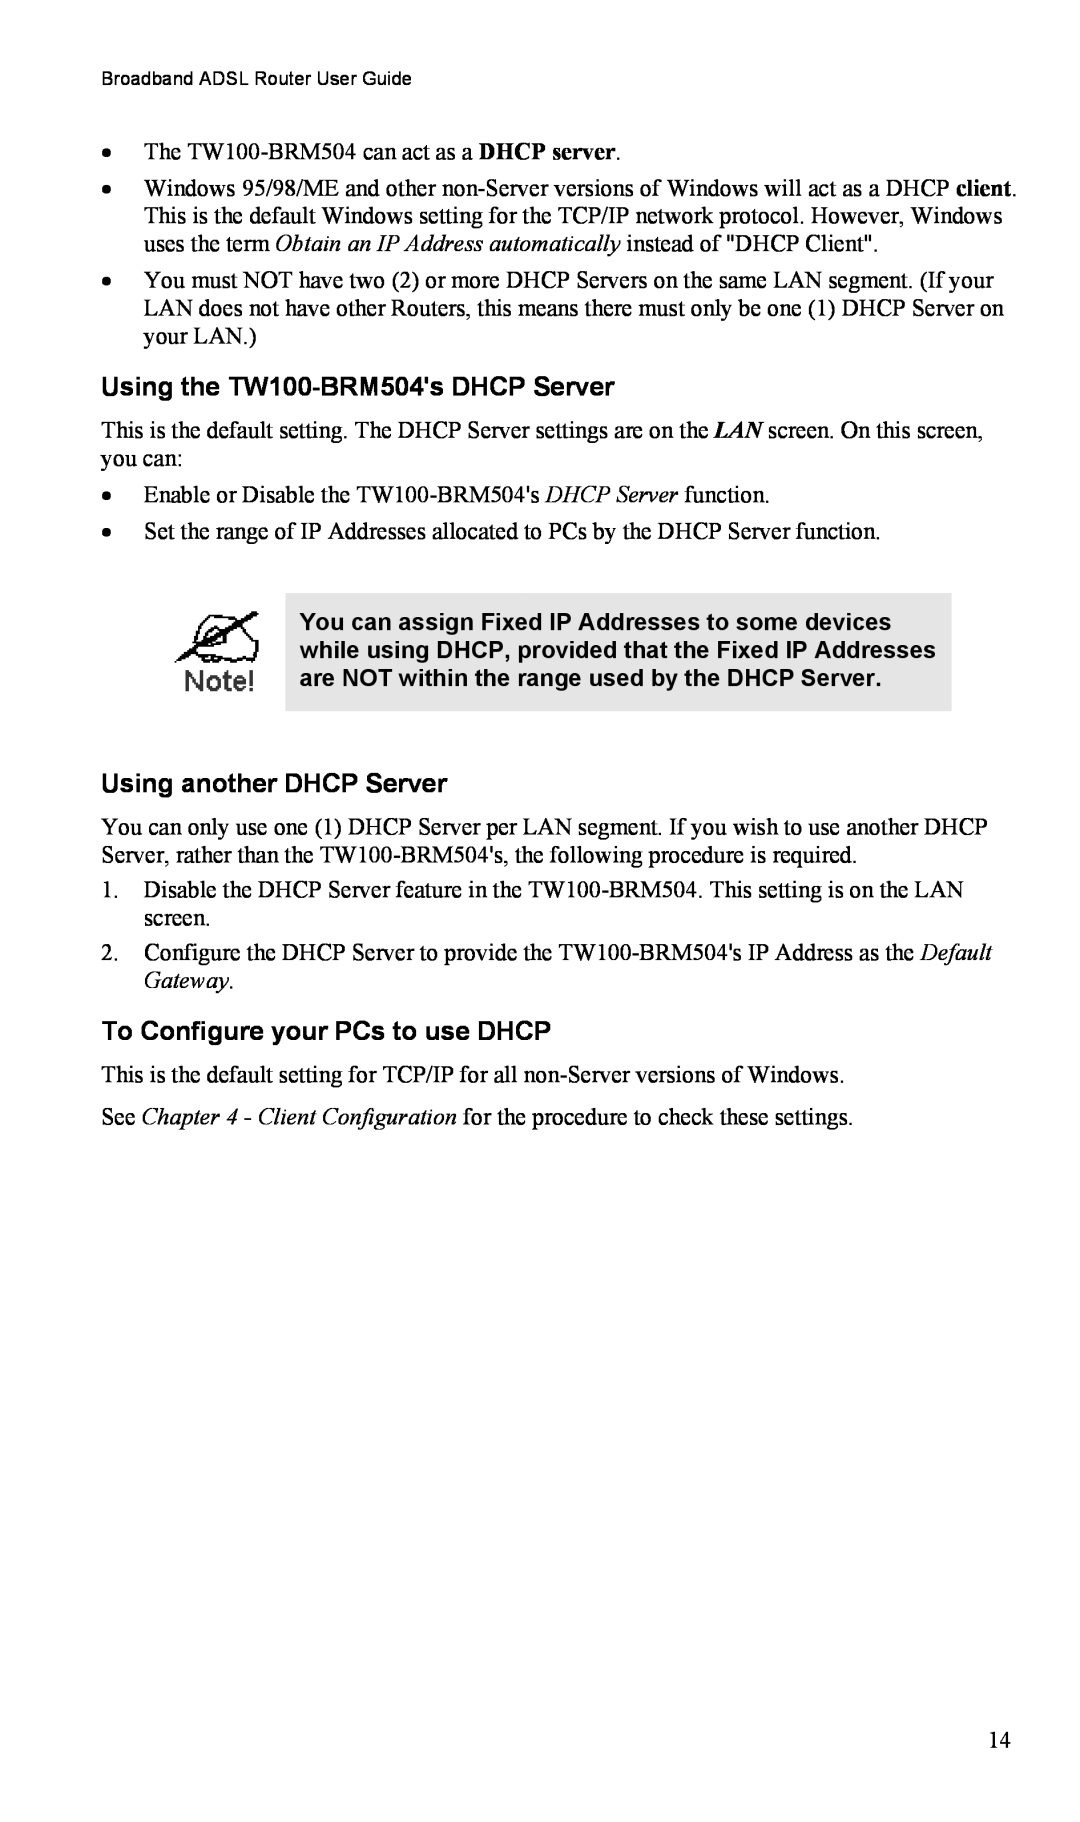 TRENDnet manual Using the TW100-BRM504sDHCP Server, Using another DHCP Server, To Configure your PCs to use DHCP 